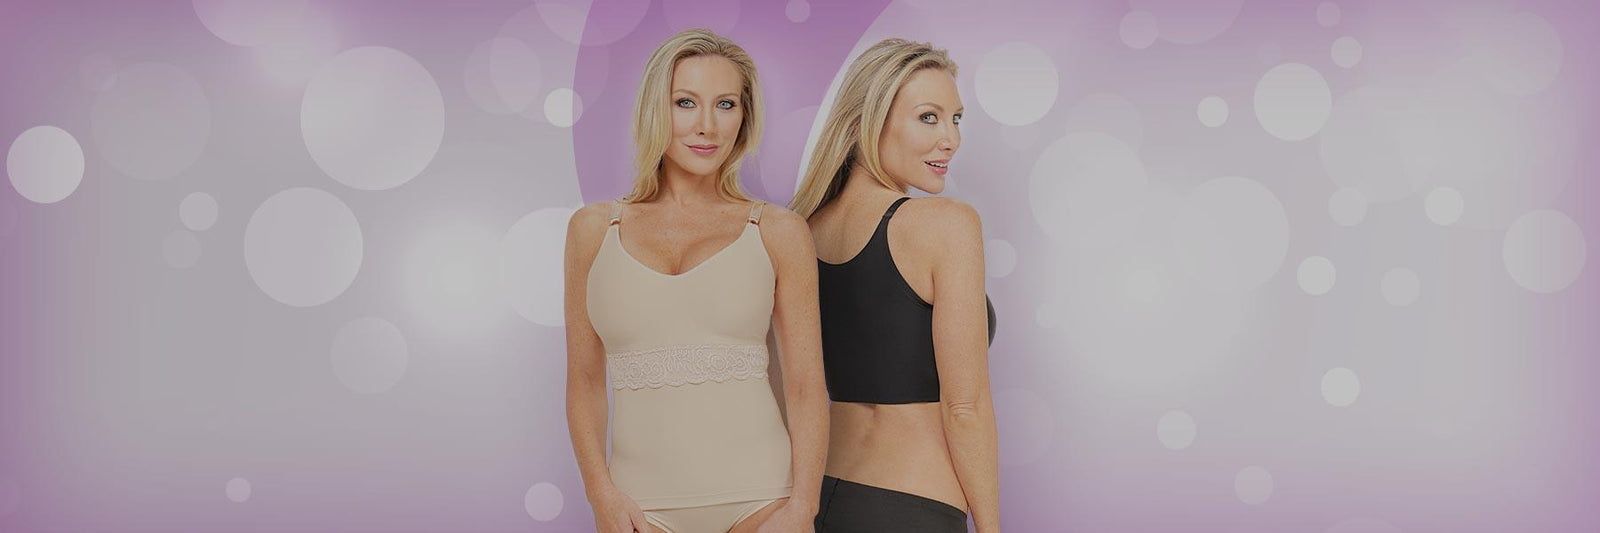 Bra Boutique Toronto - Looking for a wire free shaper that smooths back  bulge. Shapeez Comfeez Bralette keeps everything tucked in neatly with  built in wirefree cups that support and shape. #shapeez #